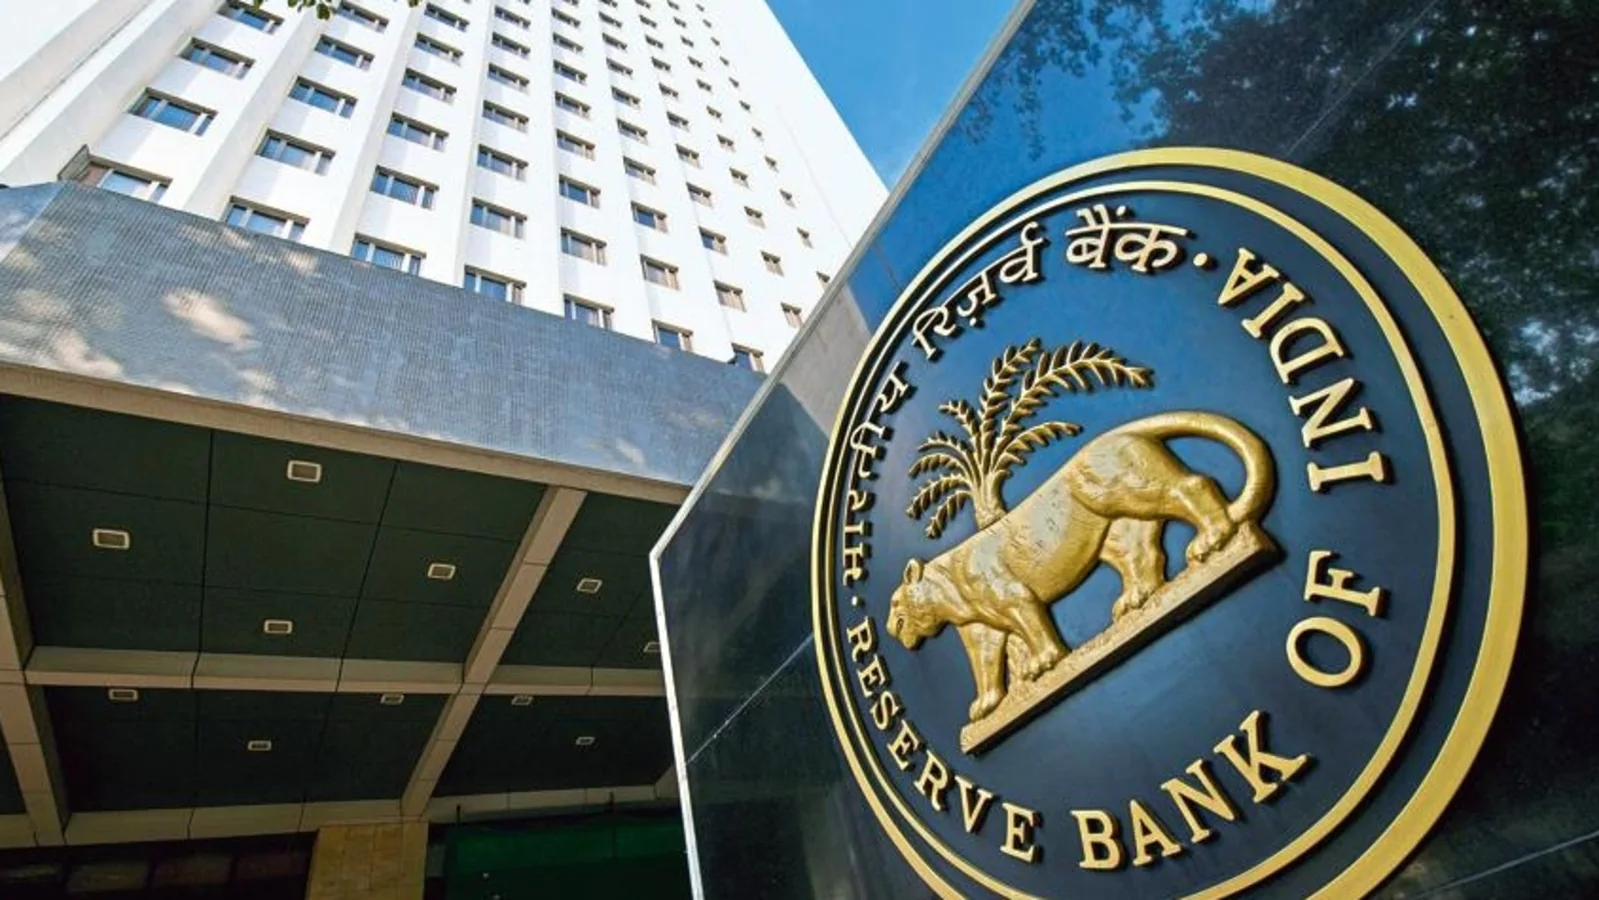 Indian economy has shown resilience amid global recession fears, says RBI